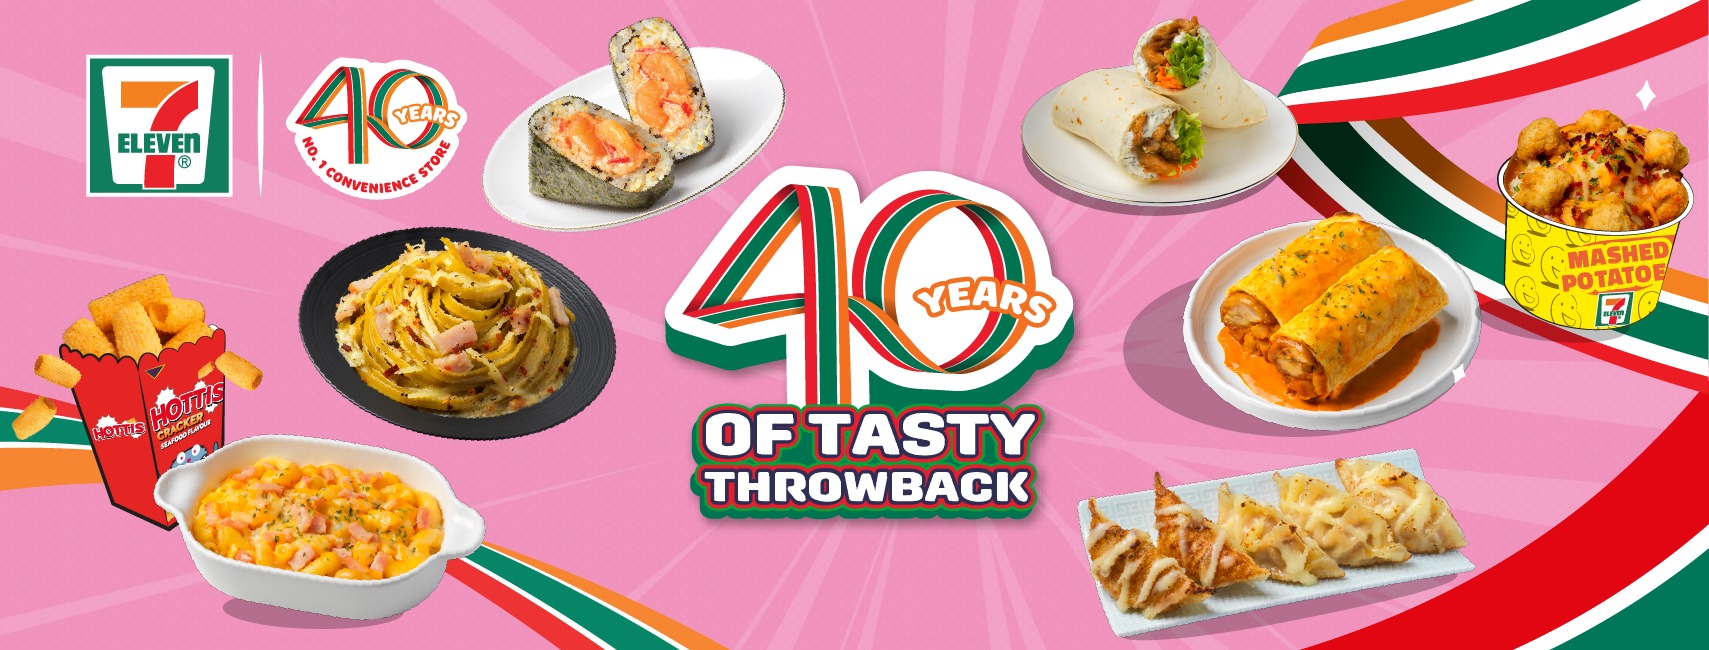 7-11 40th anniversary deal